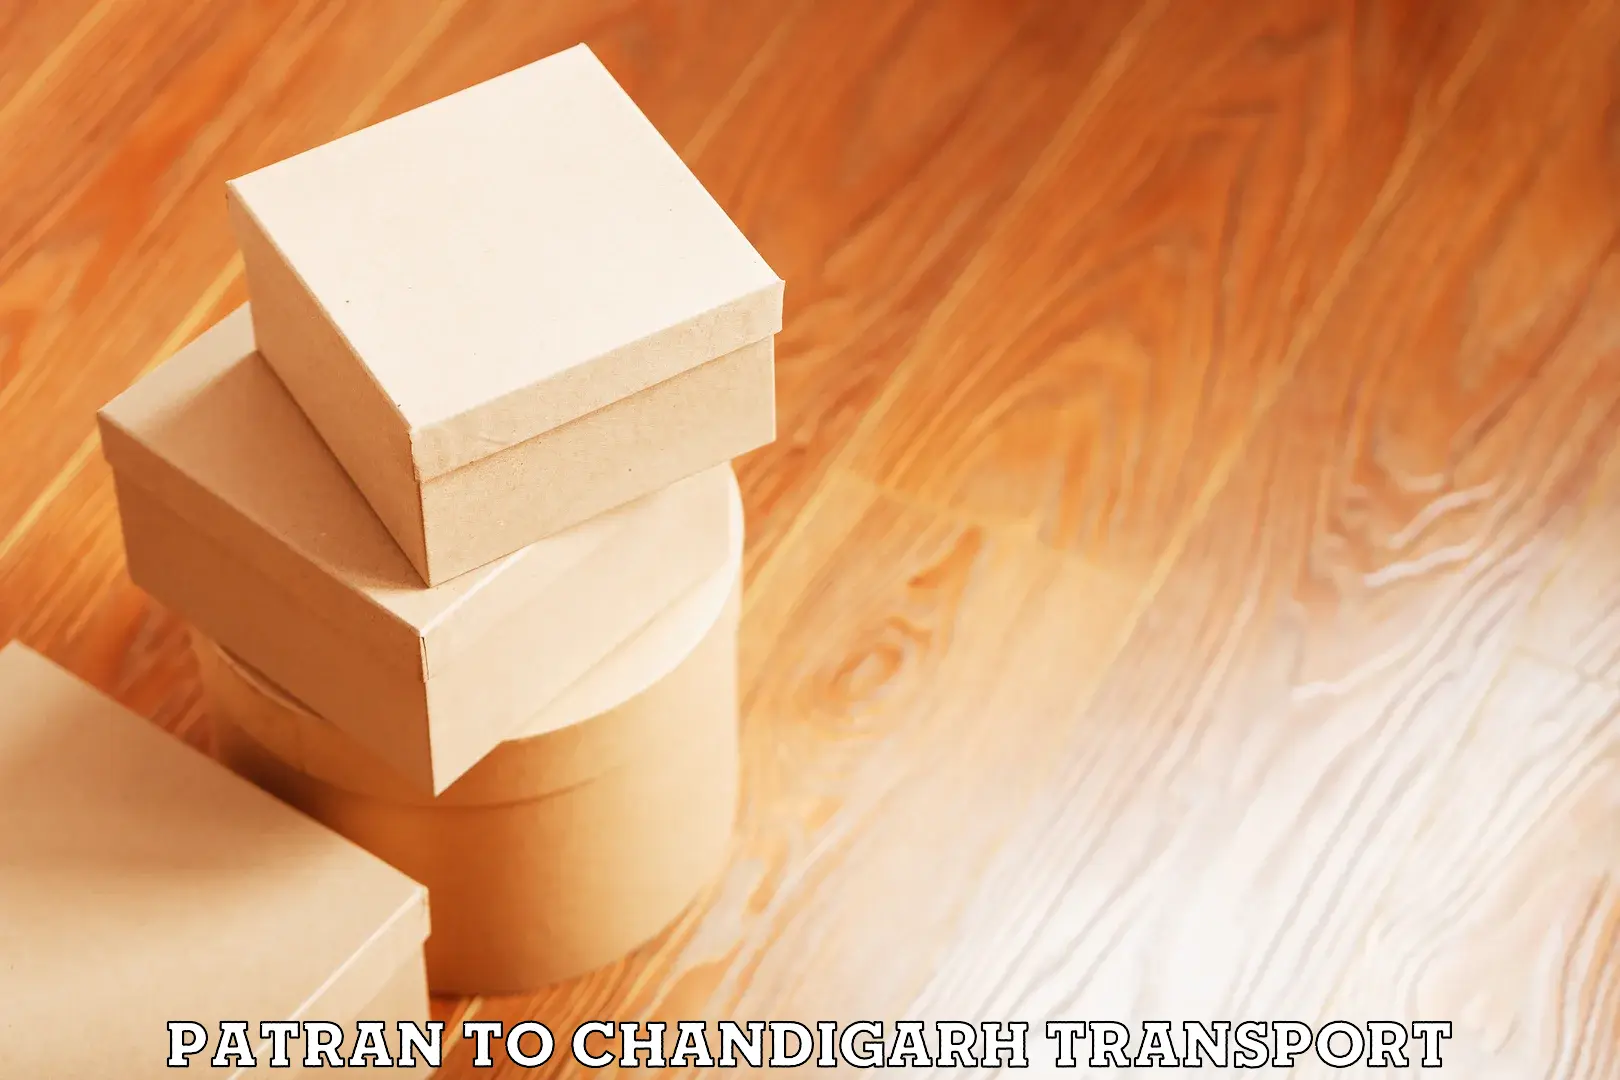 Container transport service Patran to Chandigarh